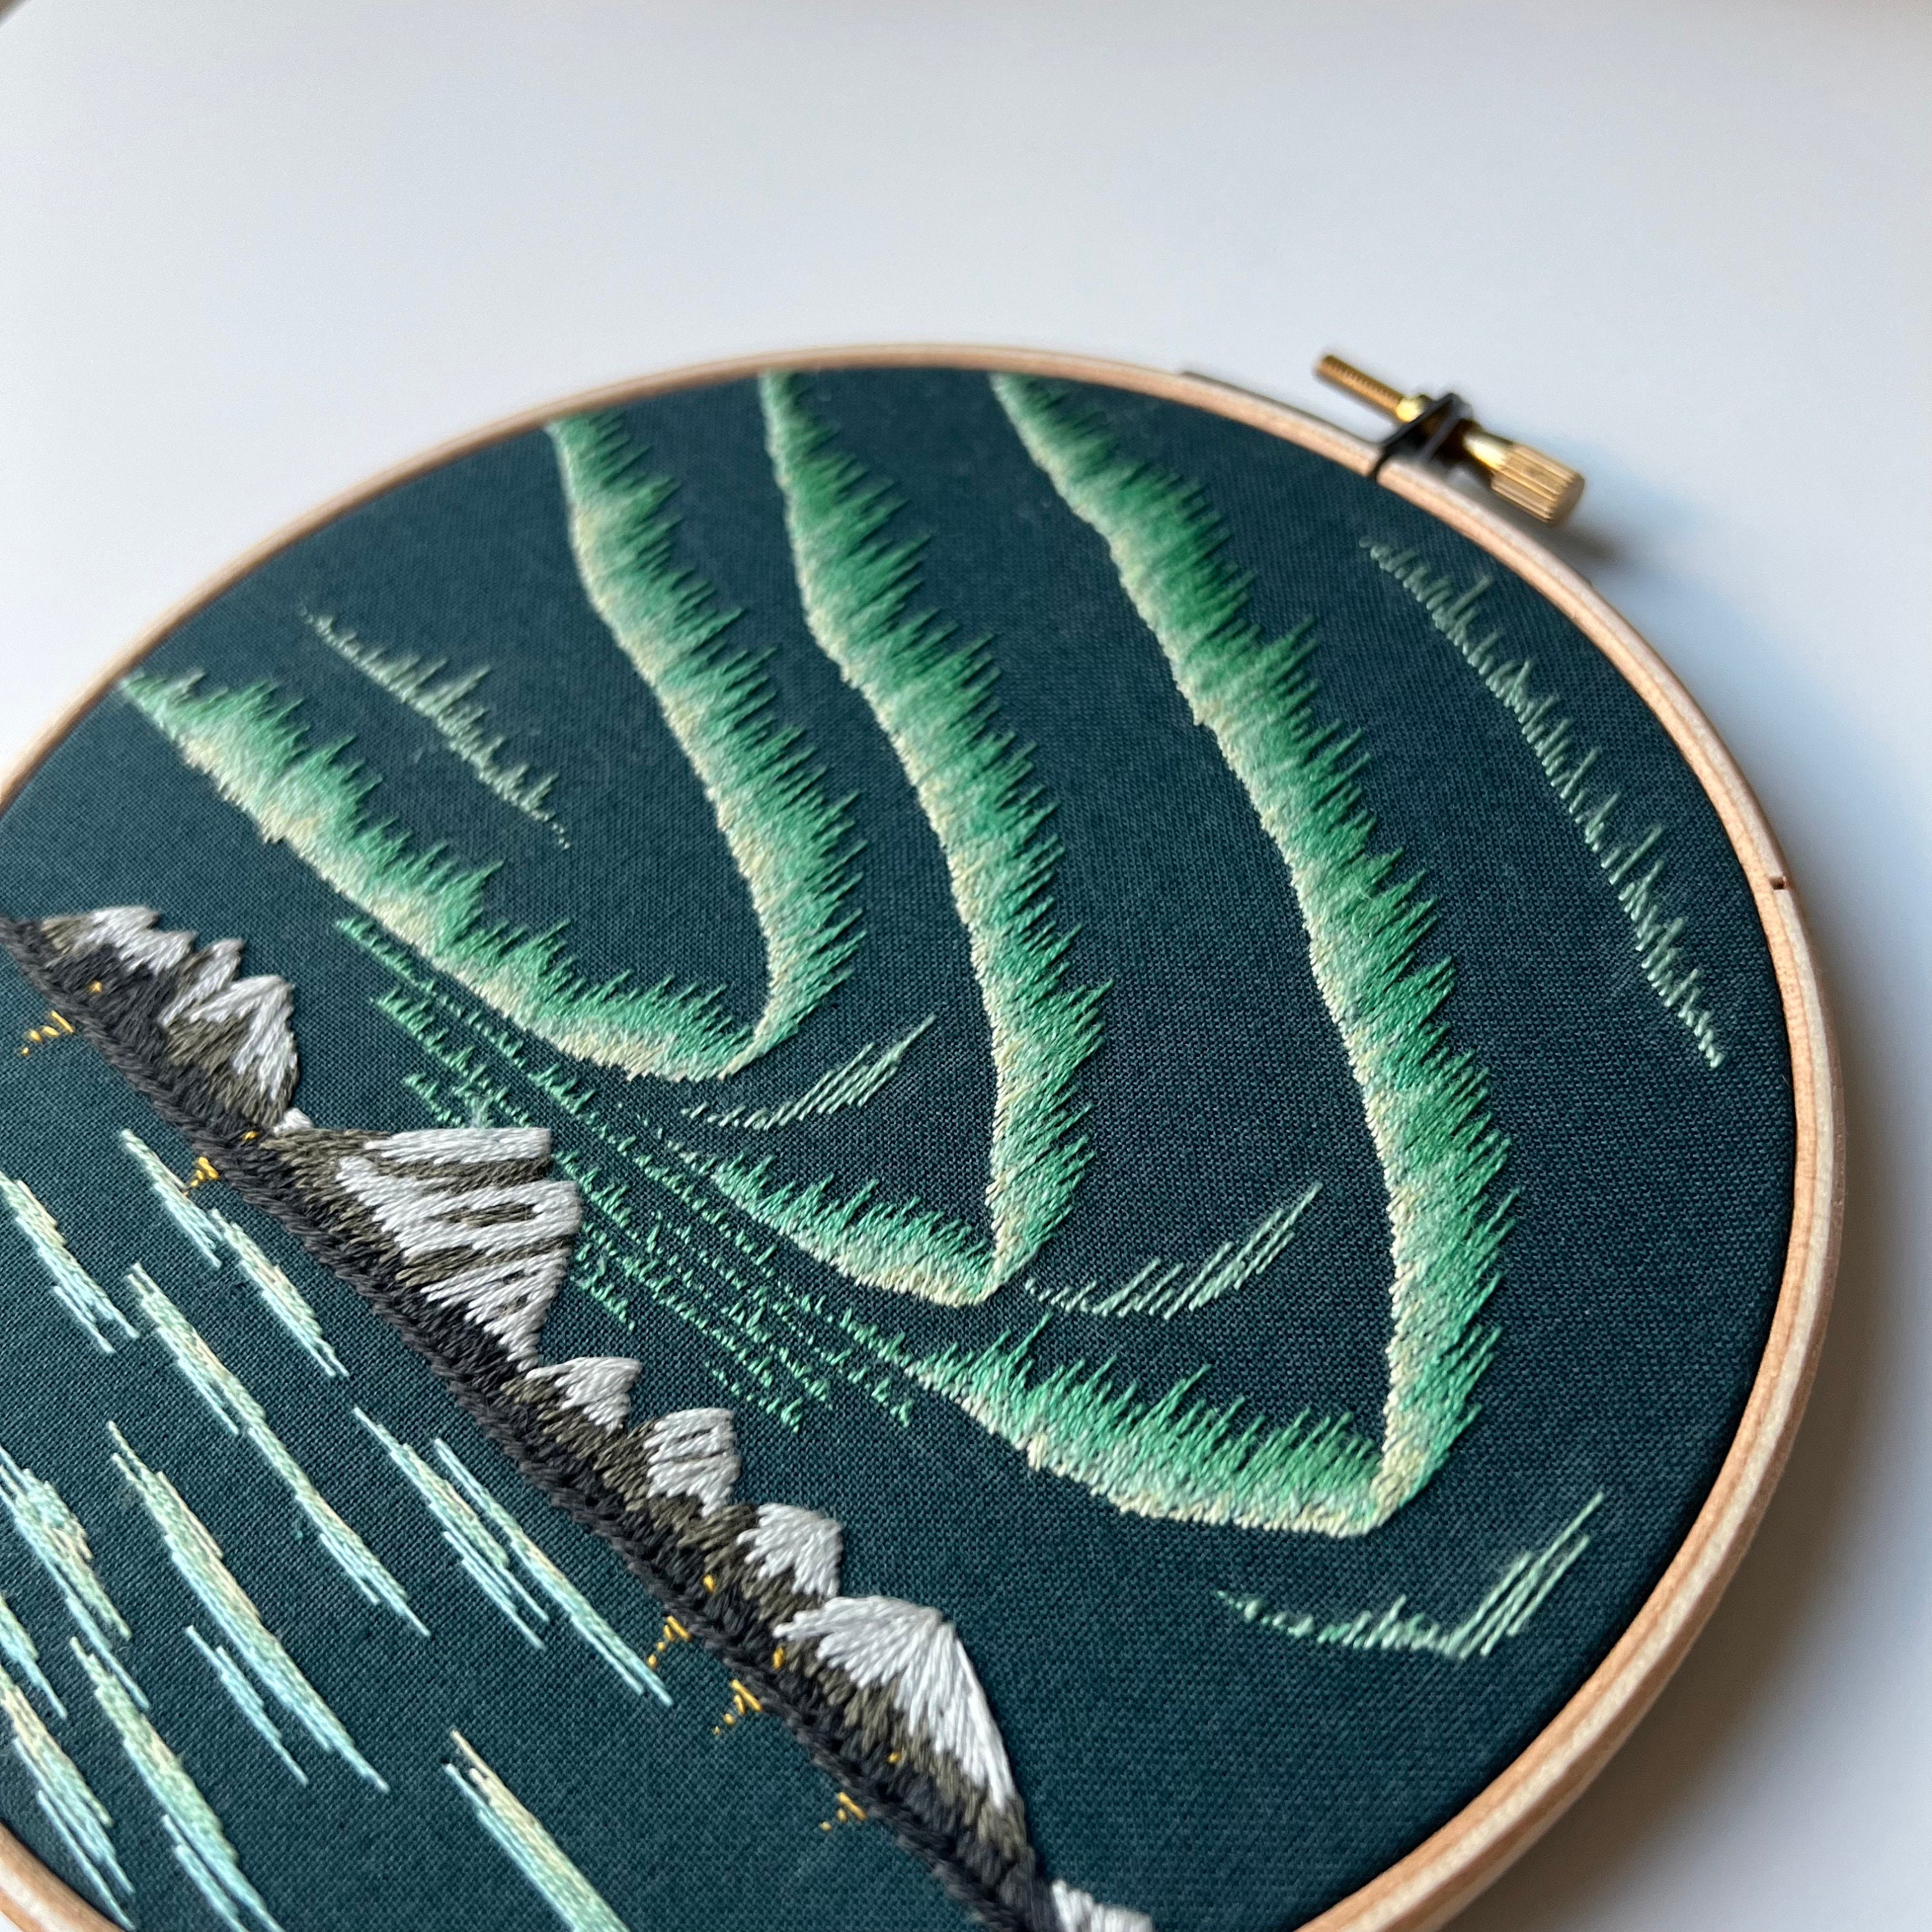 Embroidery northern lights  Miniature embroidery, Embroidery hoop art,  Embroidery and stitching